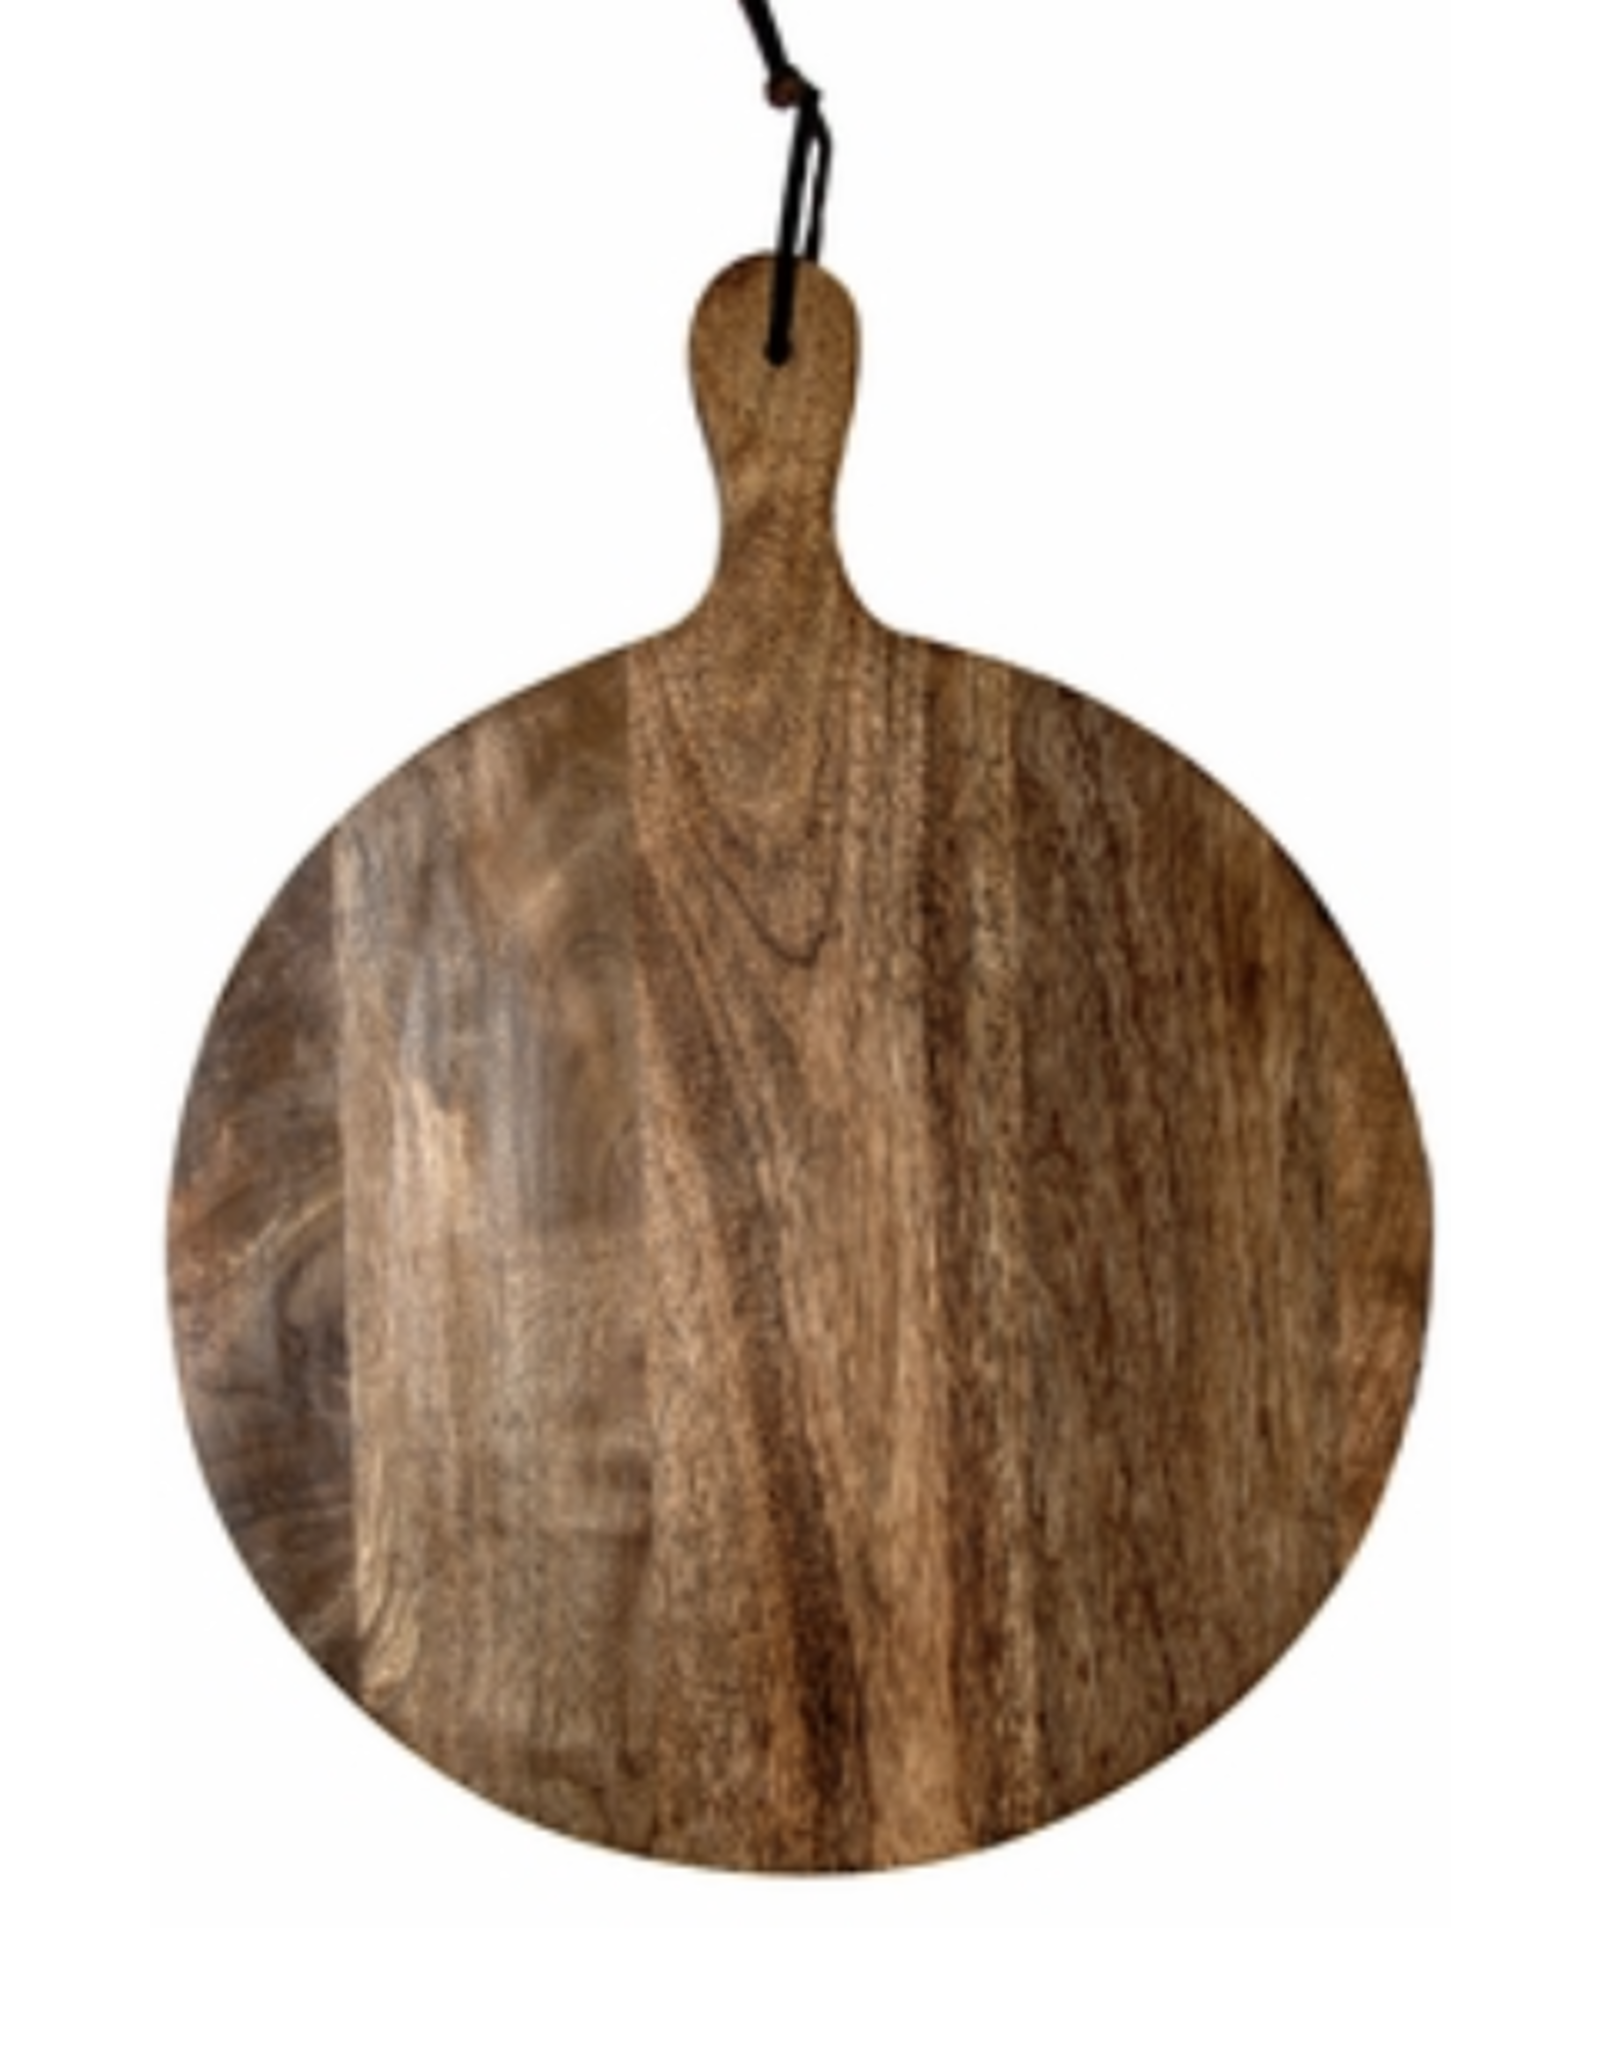 Heritage Lace Farmhouse 14" Round Serving Board